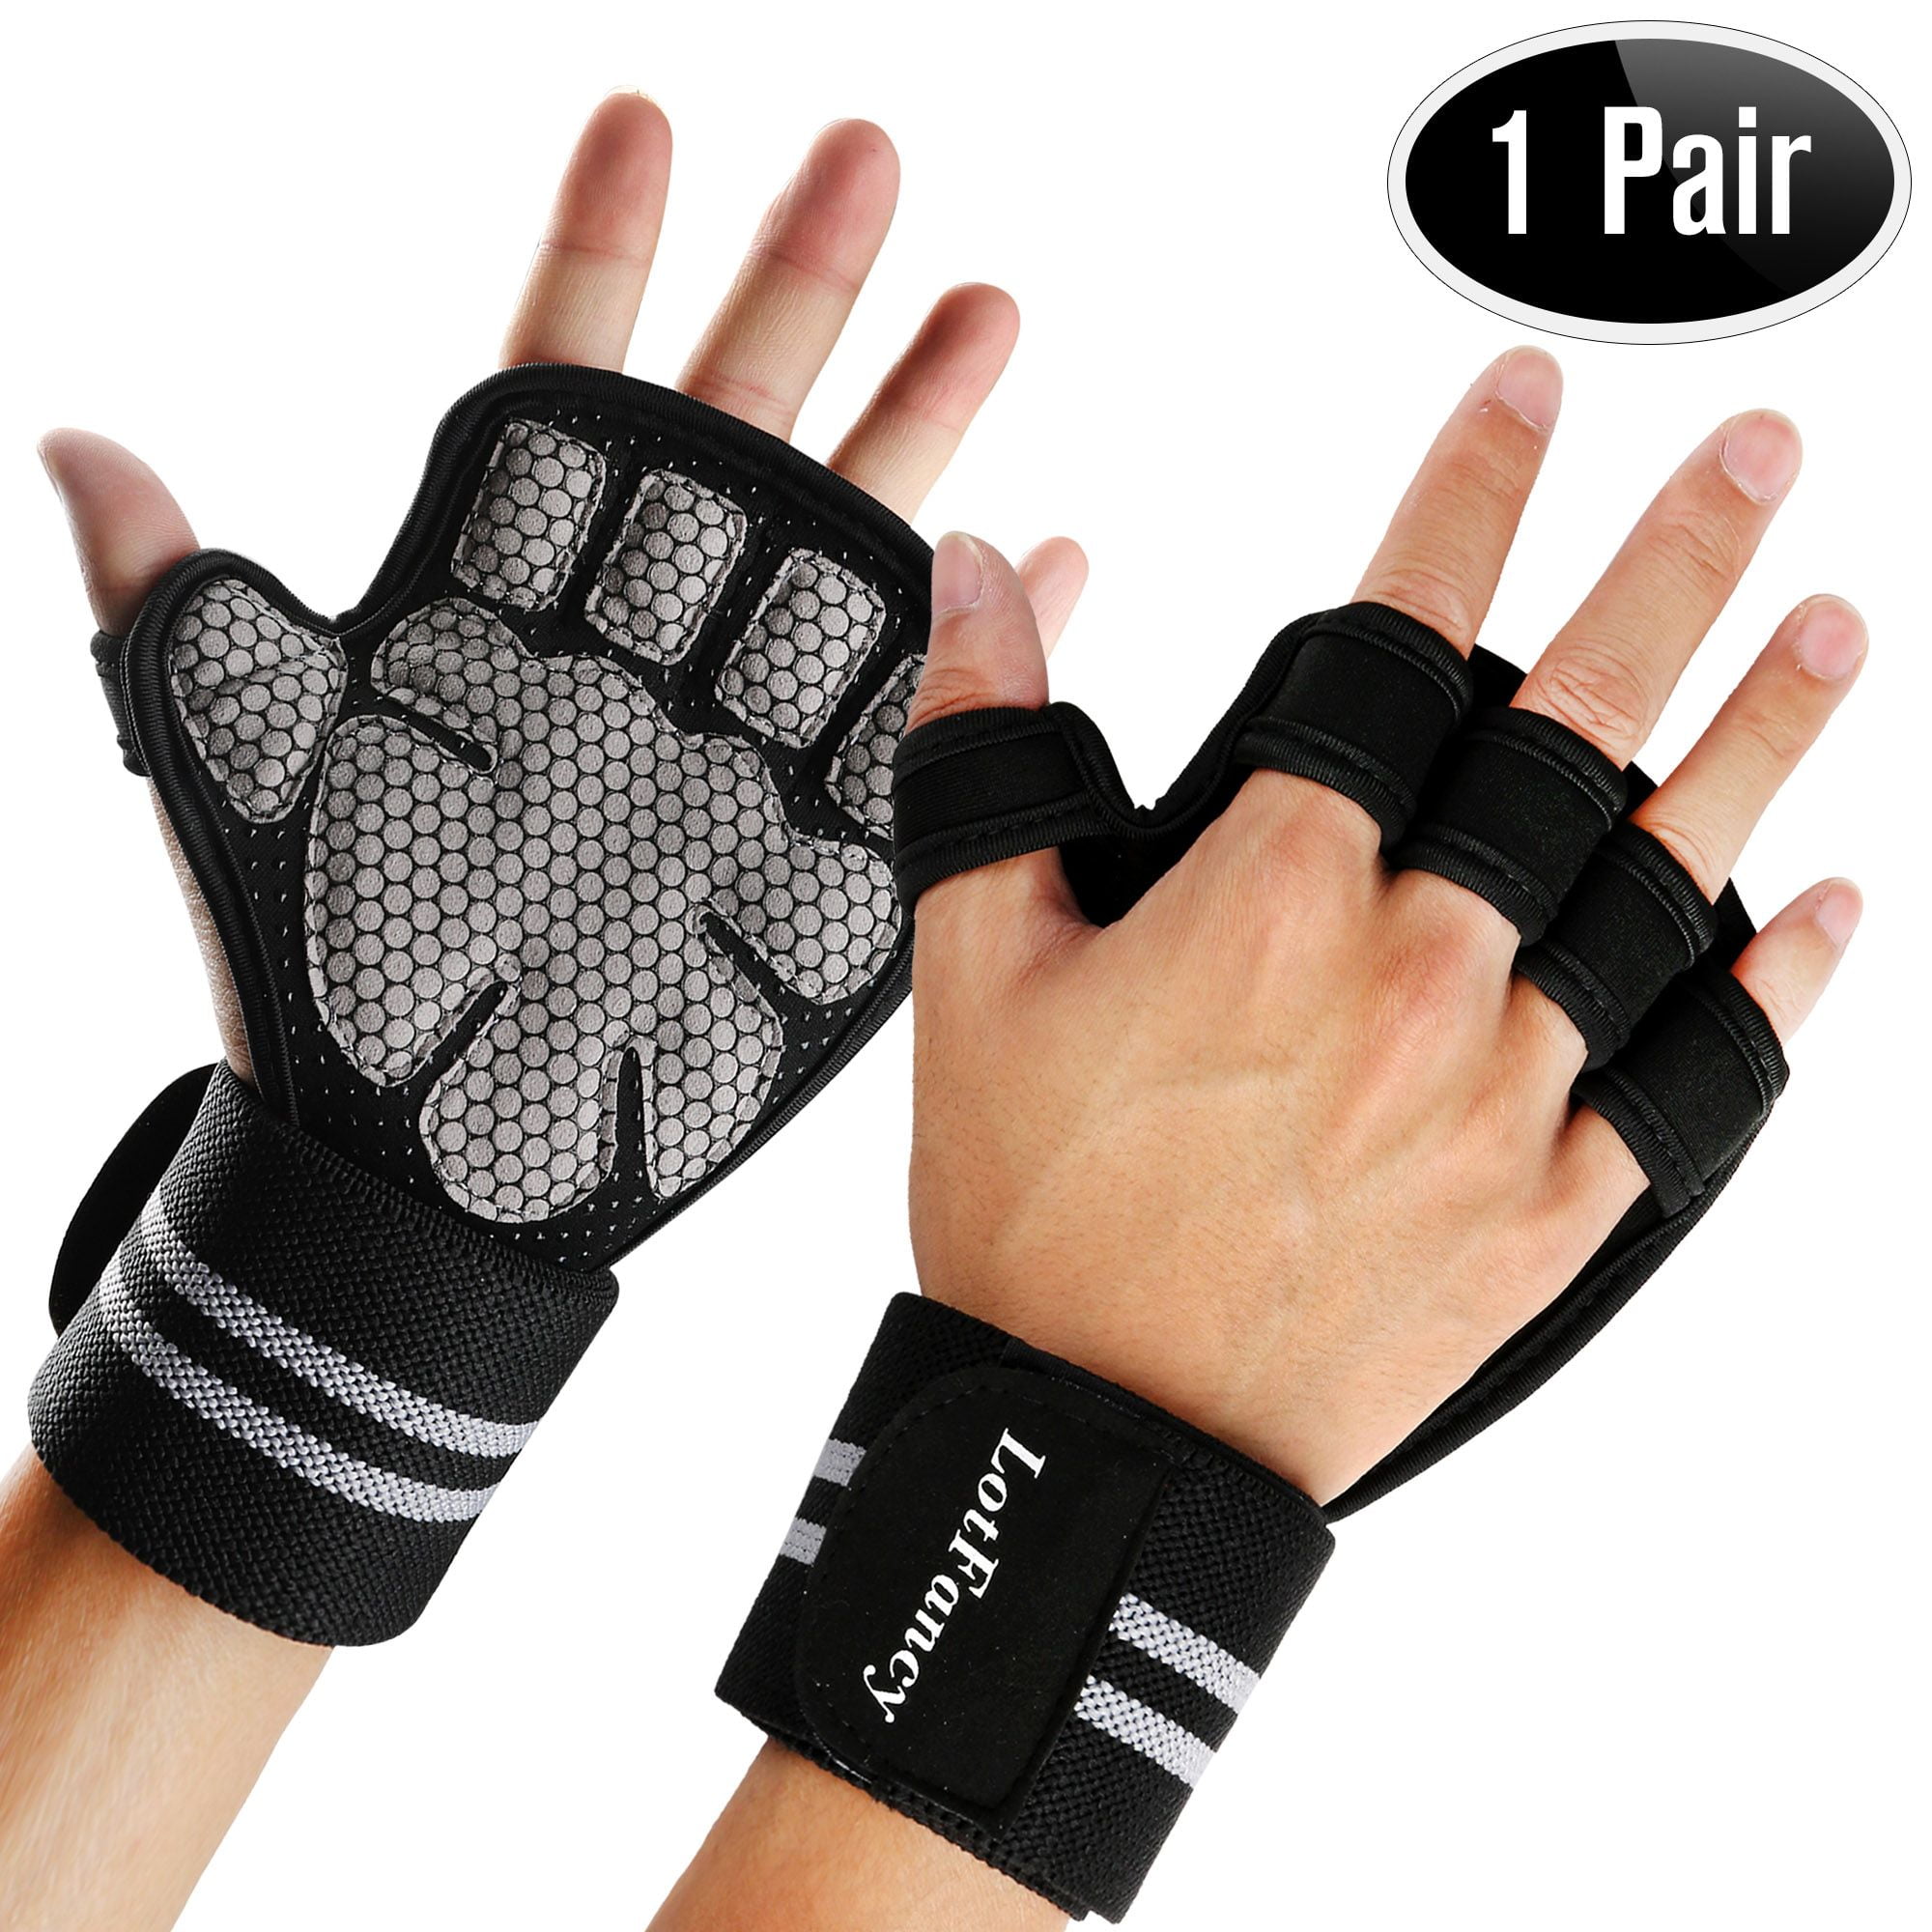 Full Palm Weight Lifting Gloves Women Weight Training Gloves with Wrist Support Non-Slip Silicone Workout Gloves For Cycling,Fitness,Crossfit,Grip Exercise 1 Pair Gym Gloves for Men Women